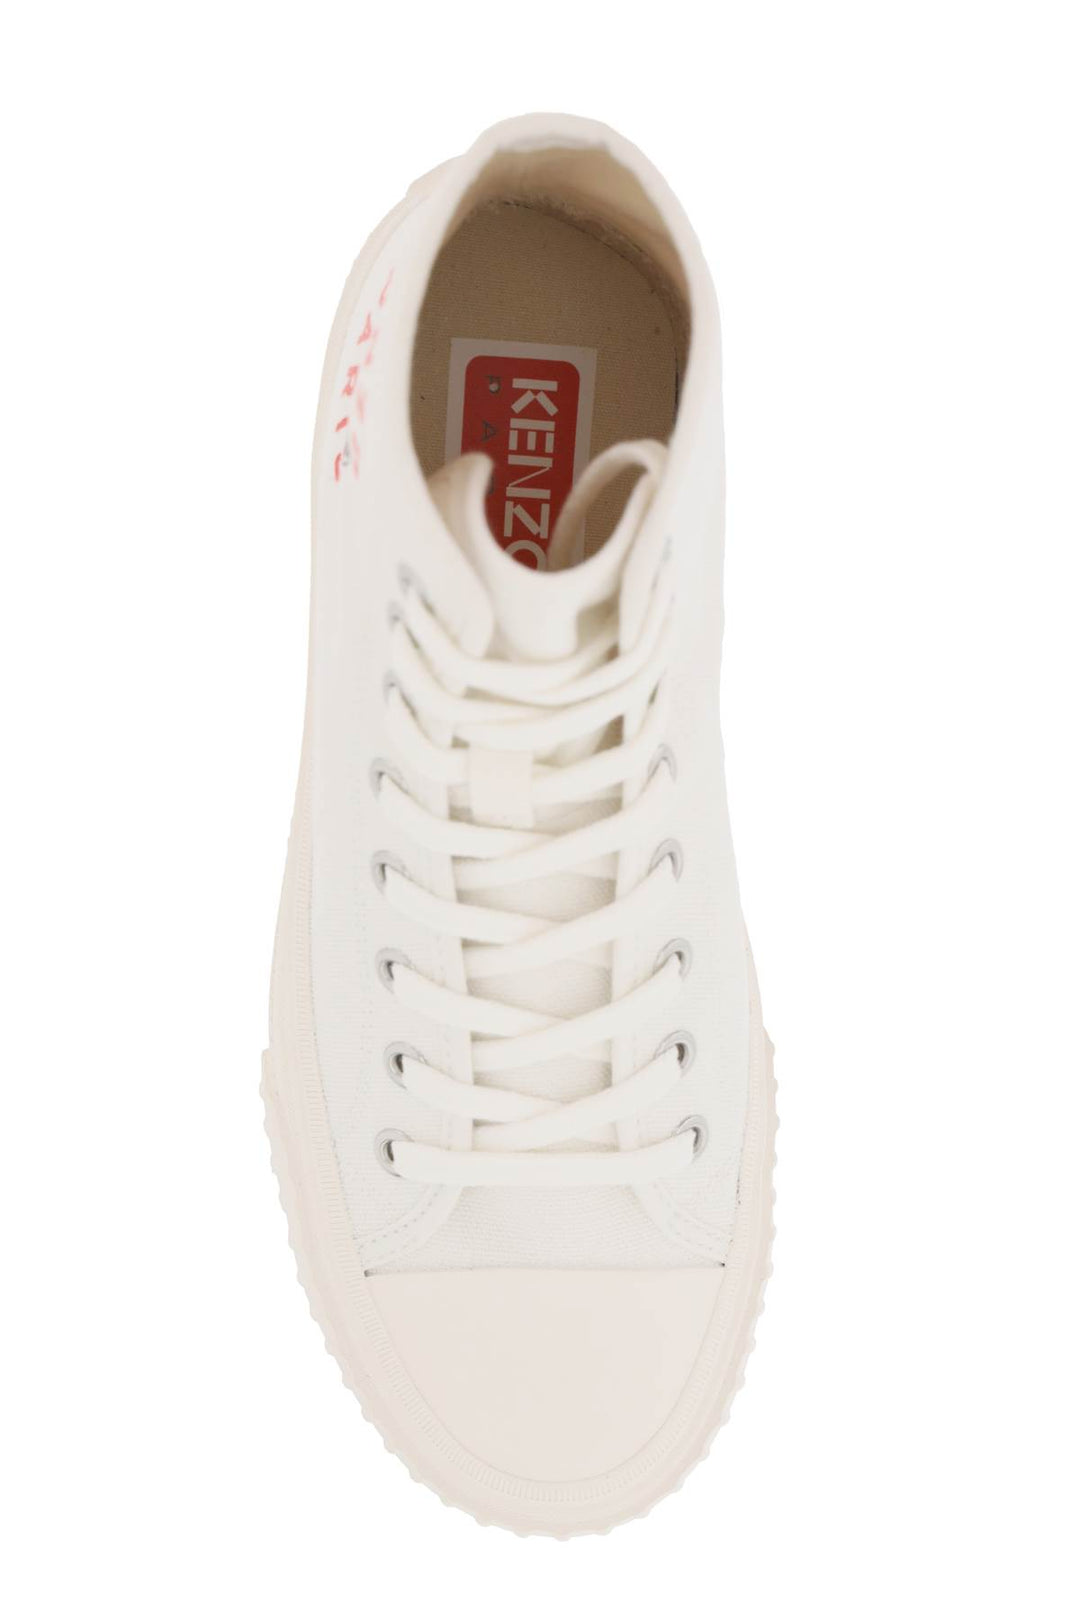 Kenzo Canvas High Top Sneakers   Bianco